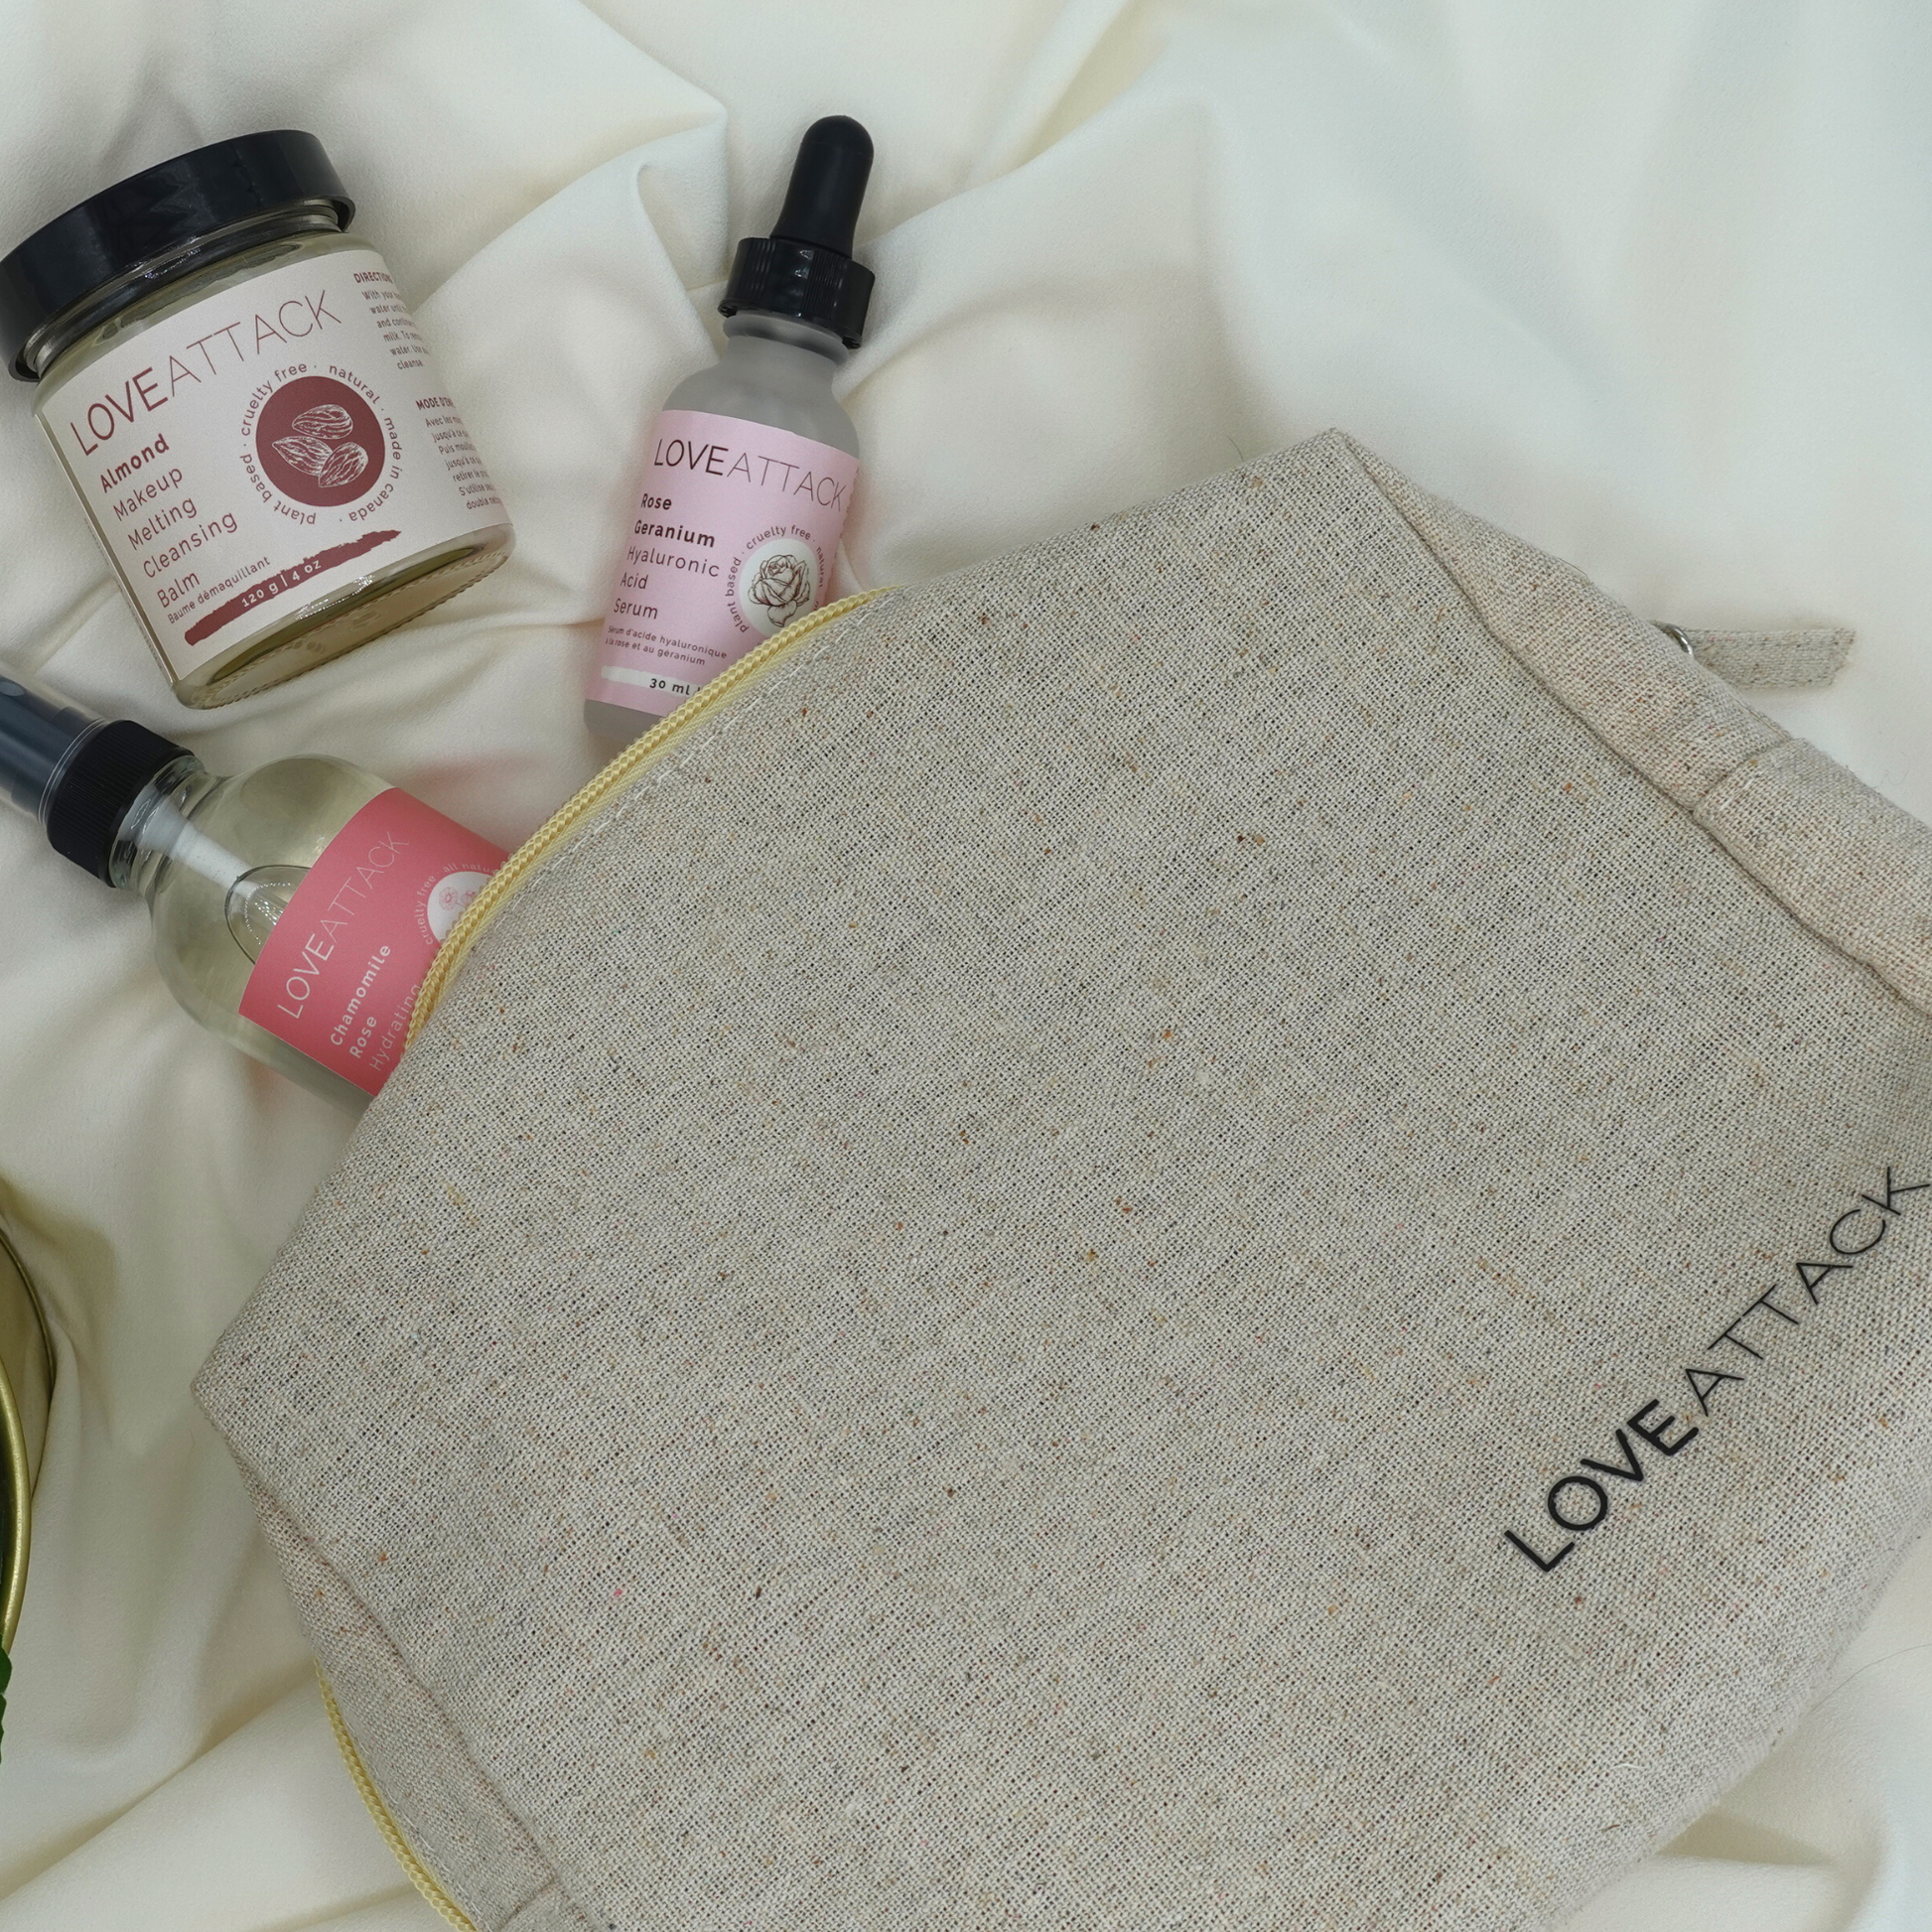 Love Attack Large Natural Cotton Cosmetics Pouch and Makeup Bag